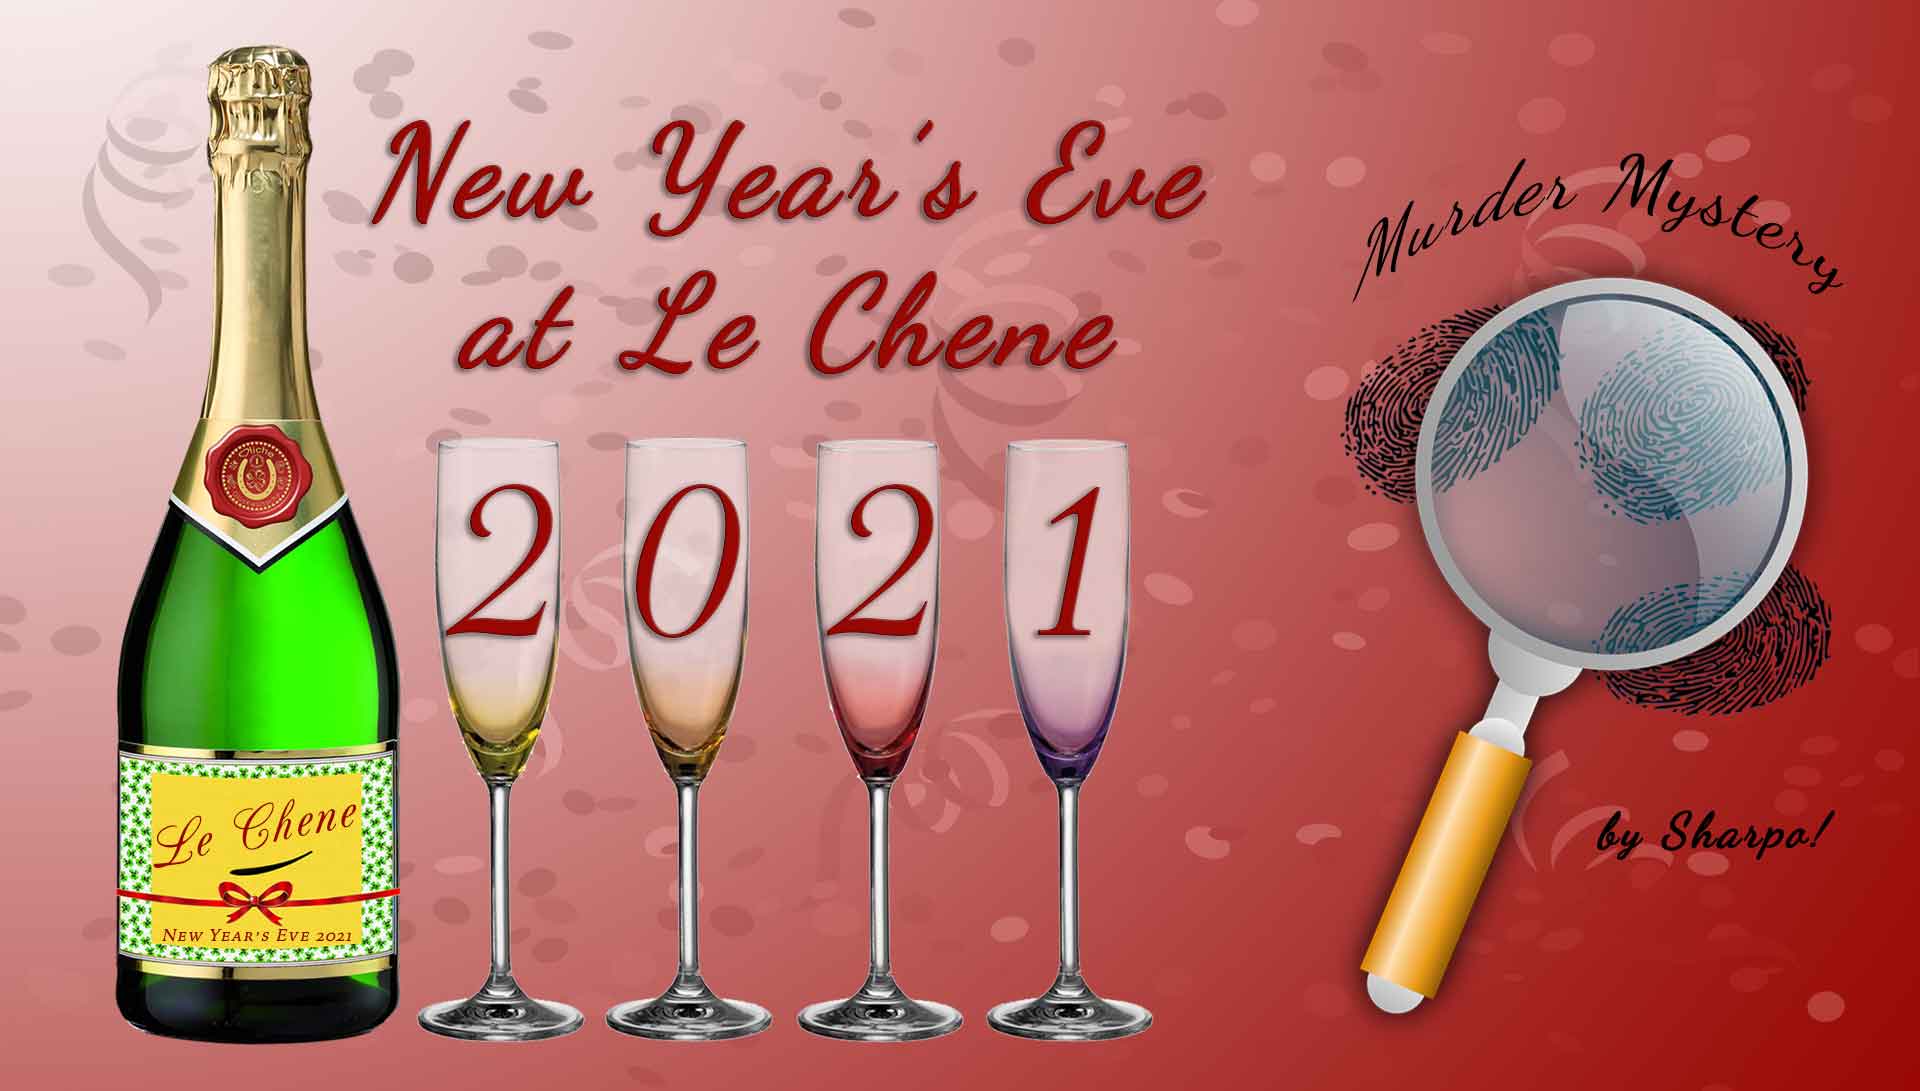 Le Chene - New Year's Eve 2021 - Murder Mystery Event